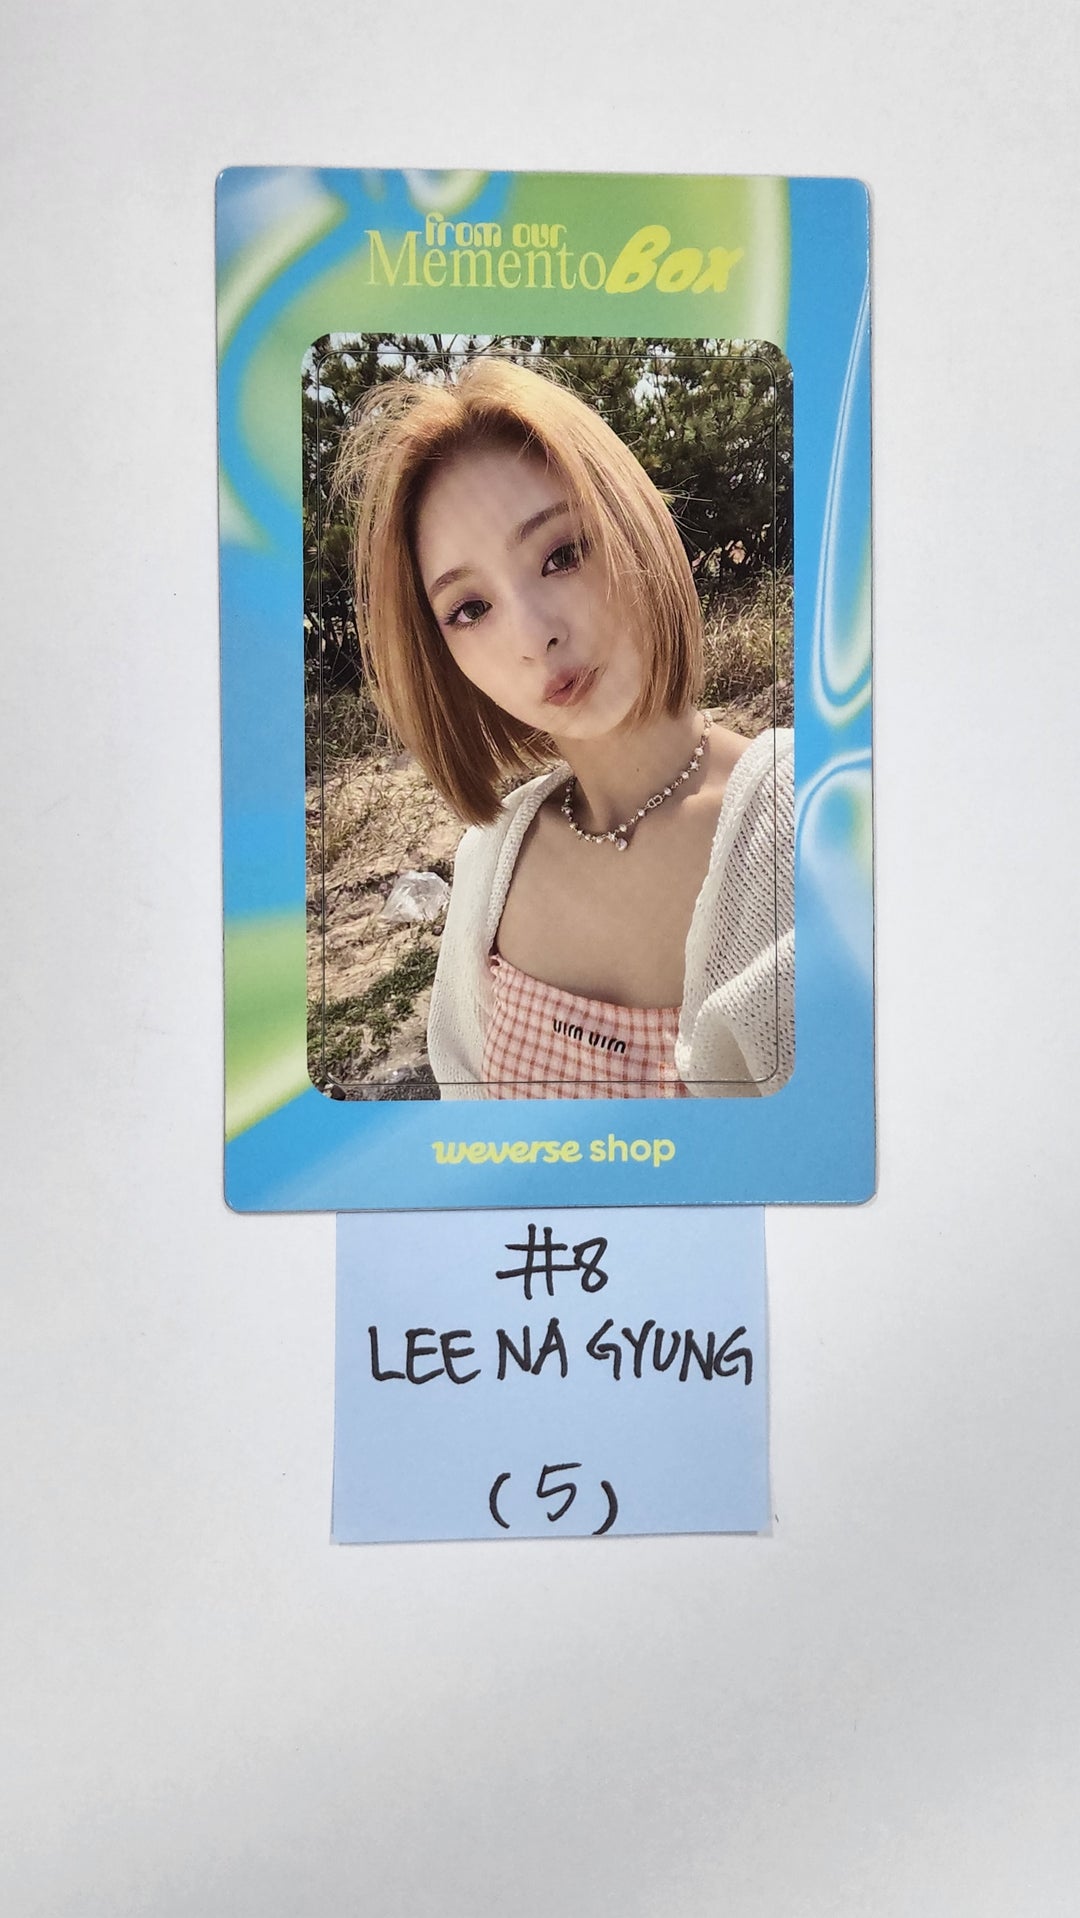 Fromis_9 "from our Memento Box" - Weverse Shop Pre-Order Benefit Magnet + Photocard Set